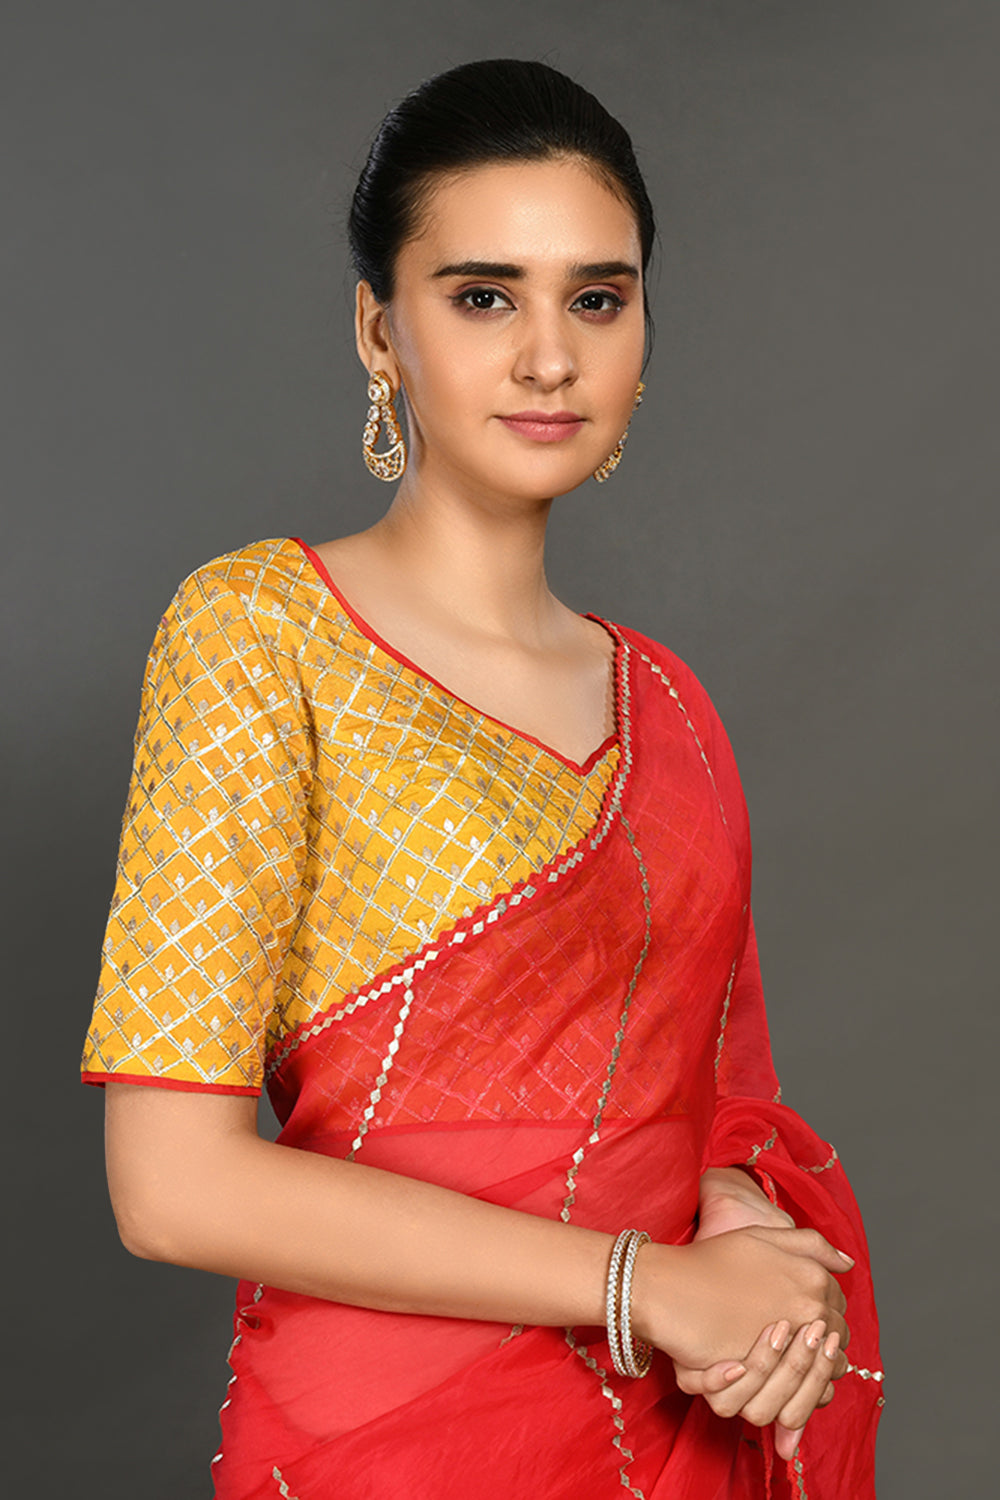 Buy red gota work saree online in USA with embroidered yellow blouse. Make a fashion statement on festive occasions and weddings with designer sarees, designer suits, Indian dresses, Anarkali suits, palazzo suits, designer gowns, sharara suits, embroidered sarees from Pure Elegance Indian fashion store in USA.-closeup